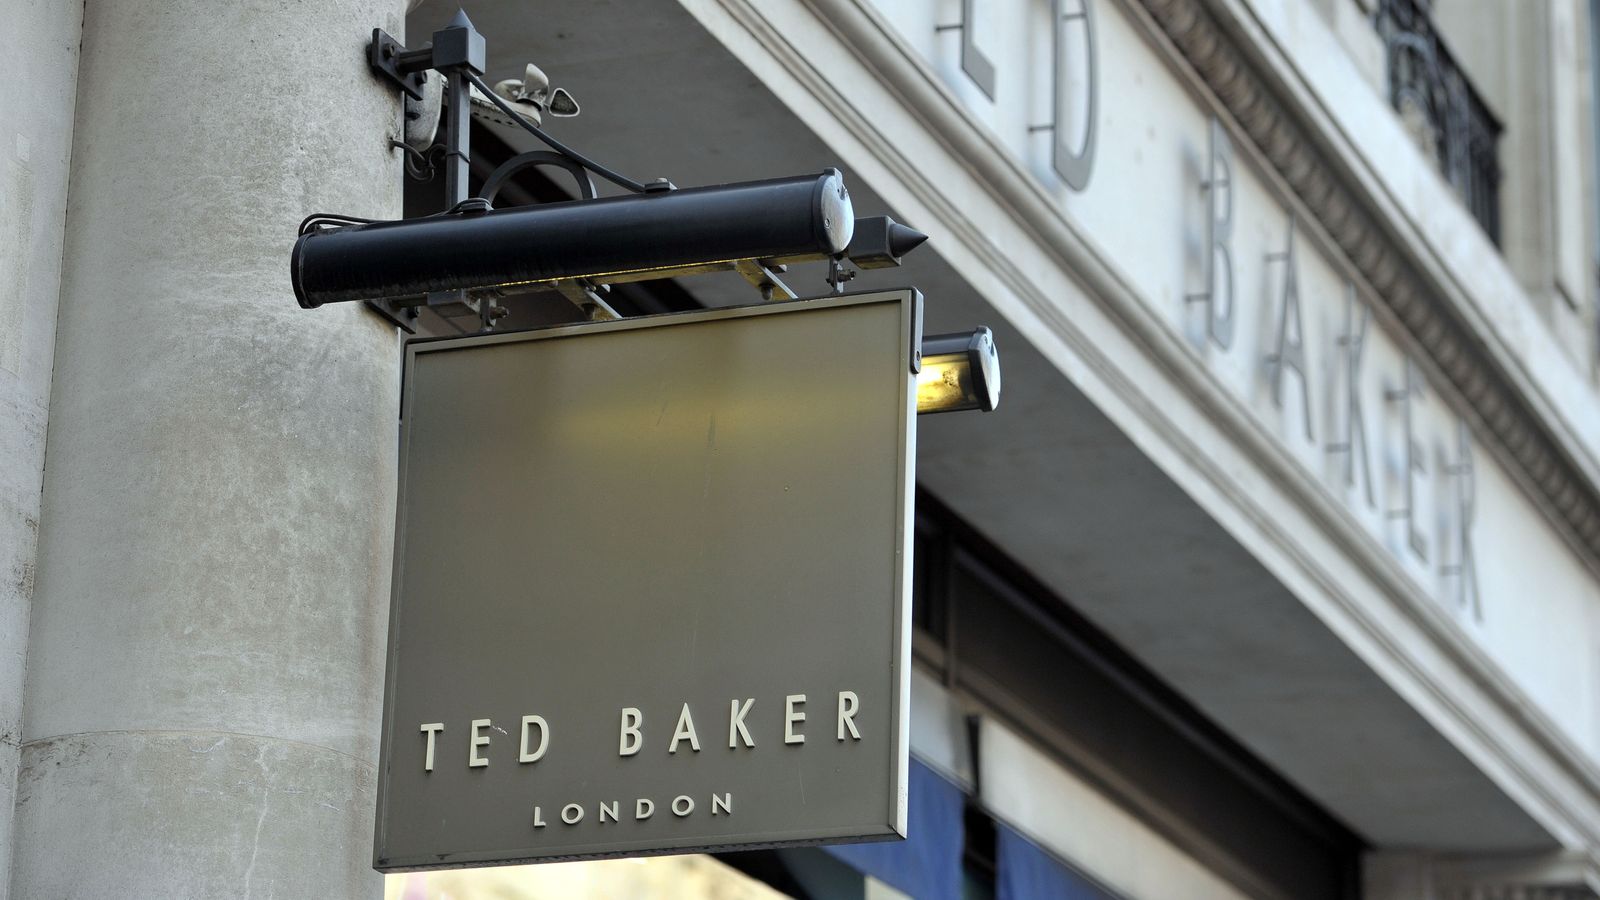 Hundreds of jobs at risk as Ted Baker calls in administrators ...